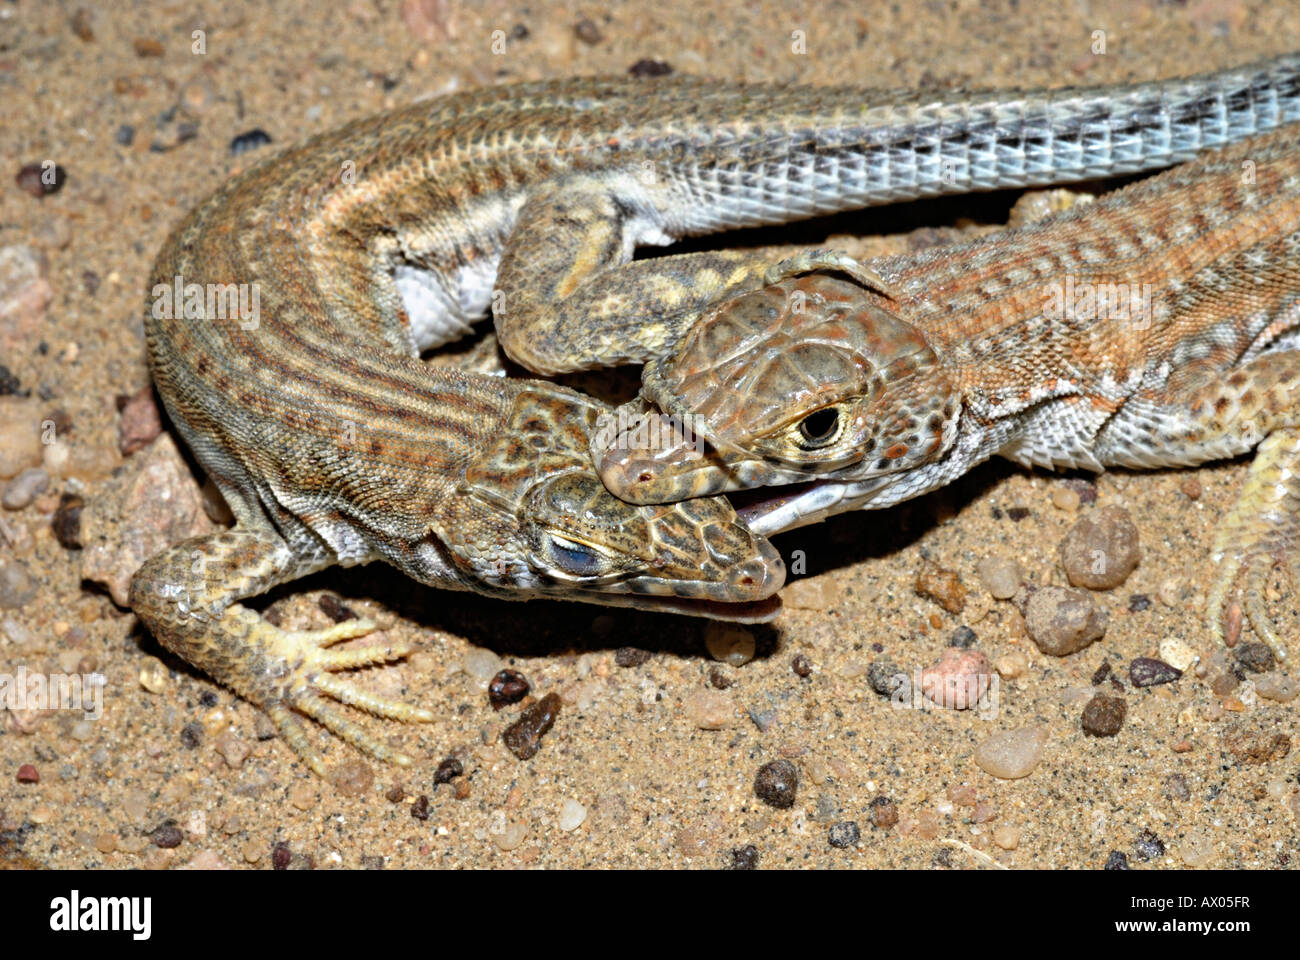 INDIAN FRINGE-FINGERED LIZARD, Acanthodactylus cantoris.  Males biting for dominance over each other. Jaisalmer Rajasthan, INDIA Stock Photo